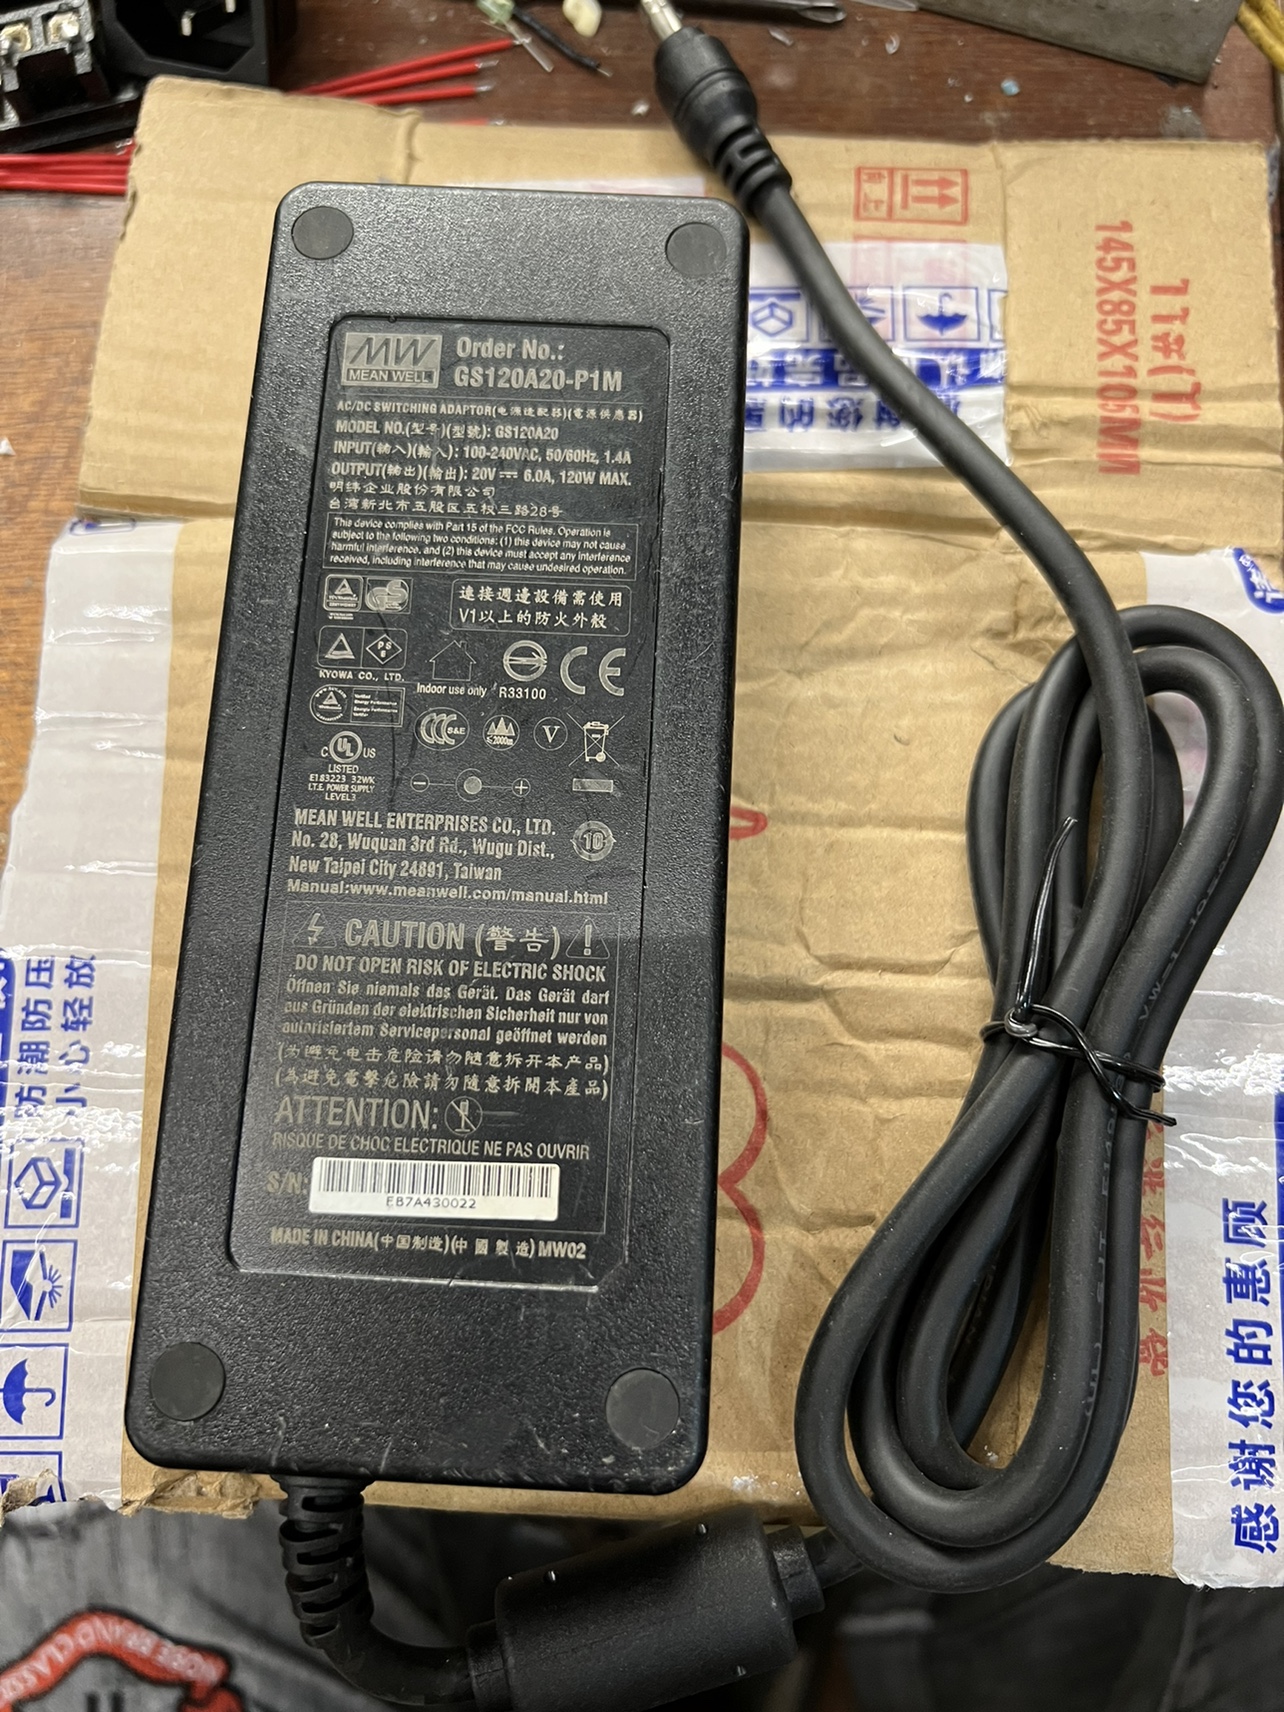 *Brand NEW*MW 20V 6A AC DC ADAPTER GS120A20 POWER SUPPLY